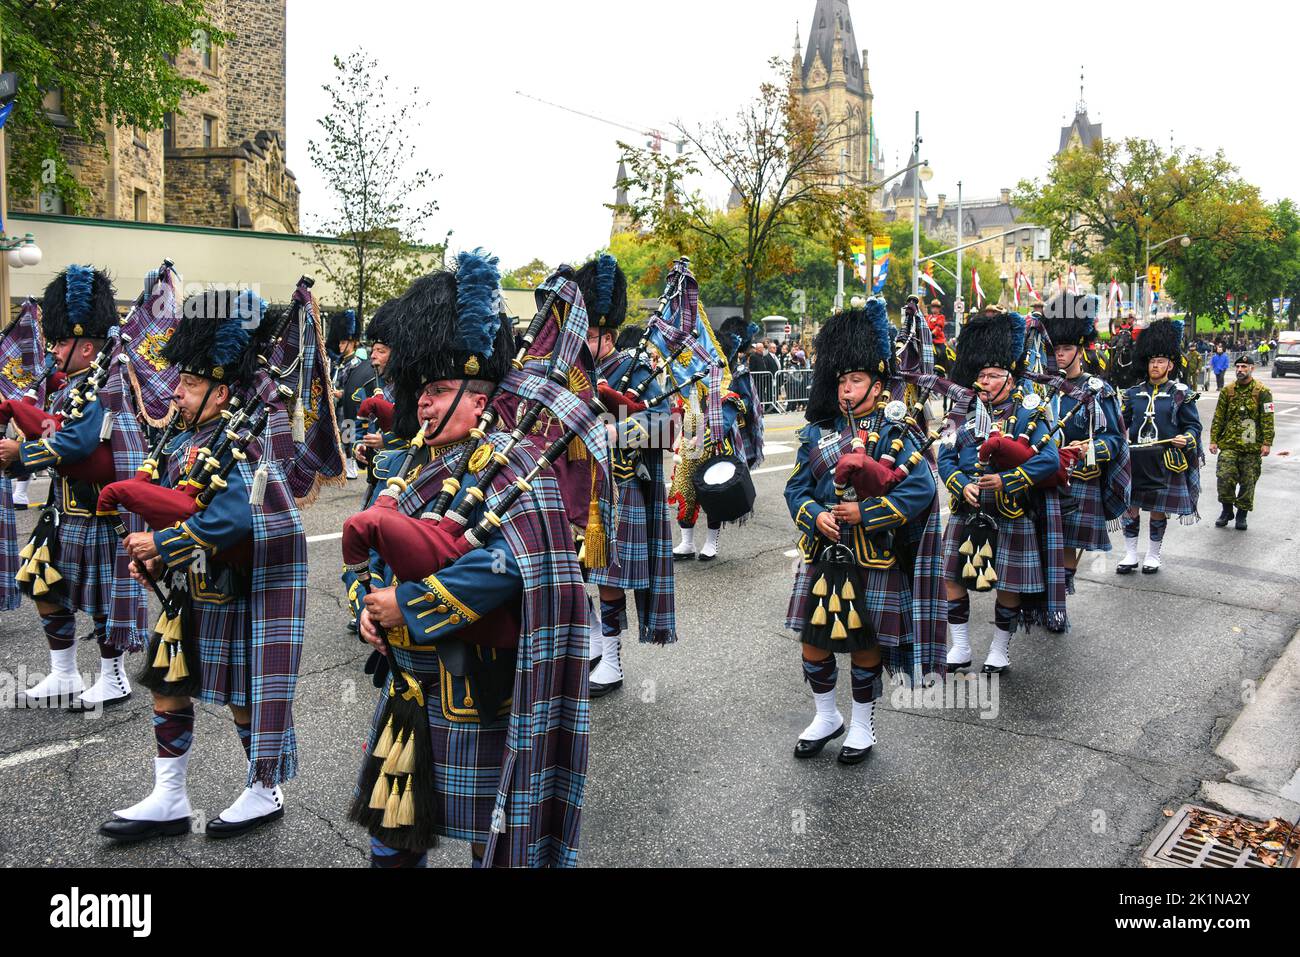 Ottawa, Canada - September 19, 2022: Marching band with bagpipers during a memorial parade on Wellington Street heading towards Christ Cathedral an Anglican church for a commemorative ceremony for the funeral of Queen Elizabeth II. The federal government declared the day a federal holiday and a national day of mourning for the Queen, with federal public servants having the day off. Stock Photo